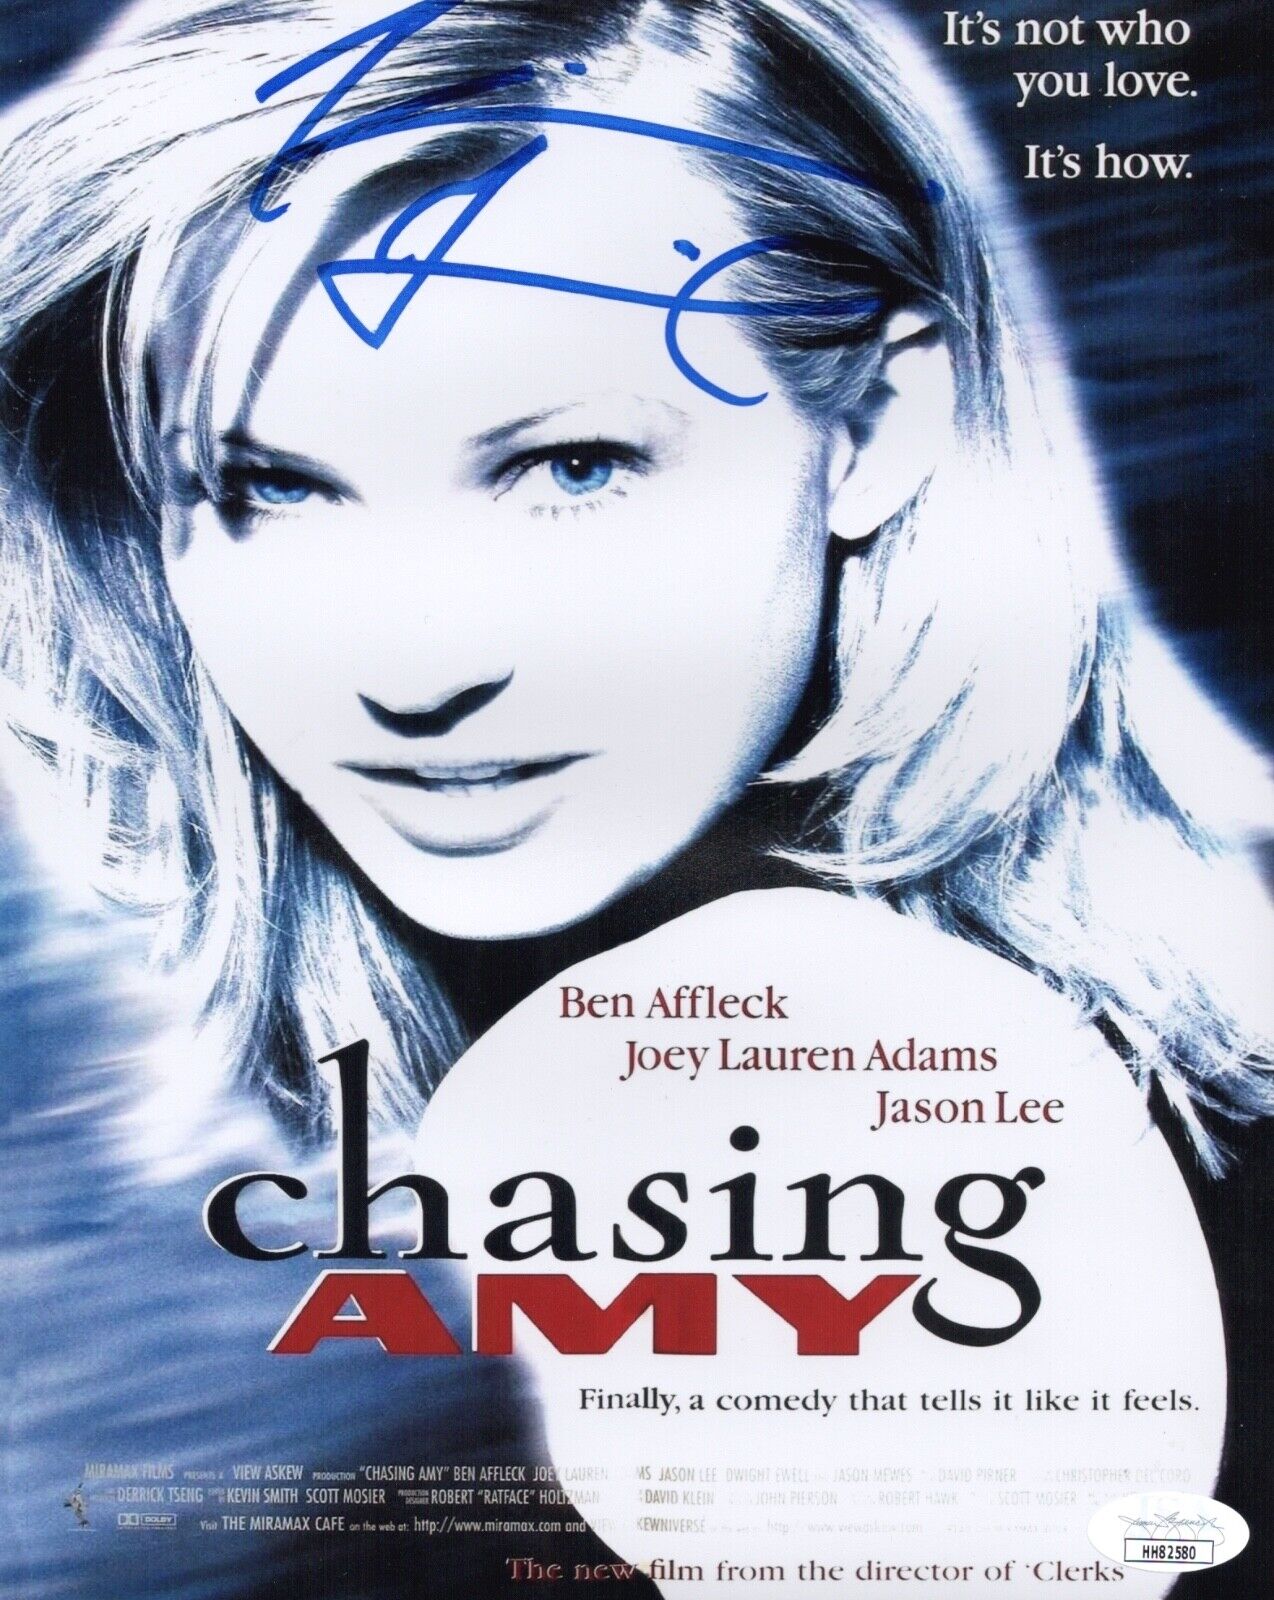 KEVIN SMITH Signed CHASING AMY 8x10 Photo Poster painting IN PERSON Autograph JSA COA Cert